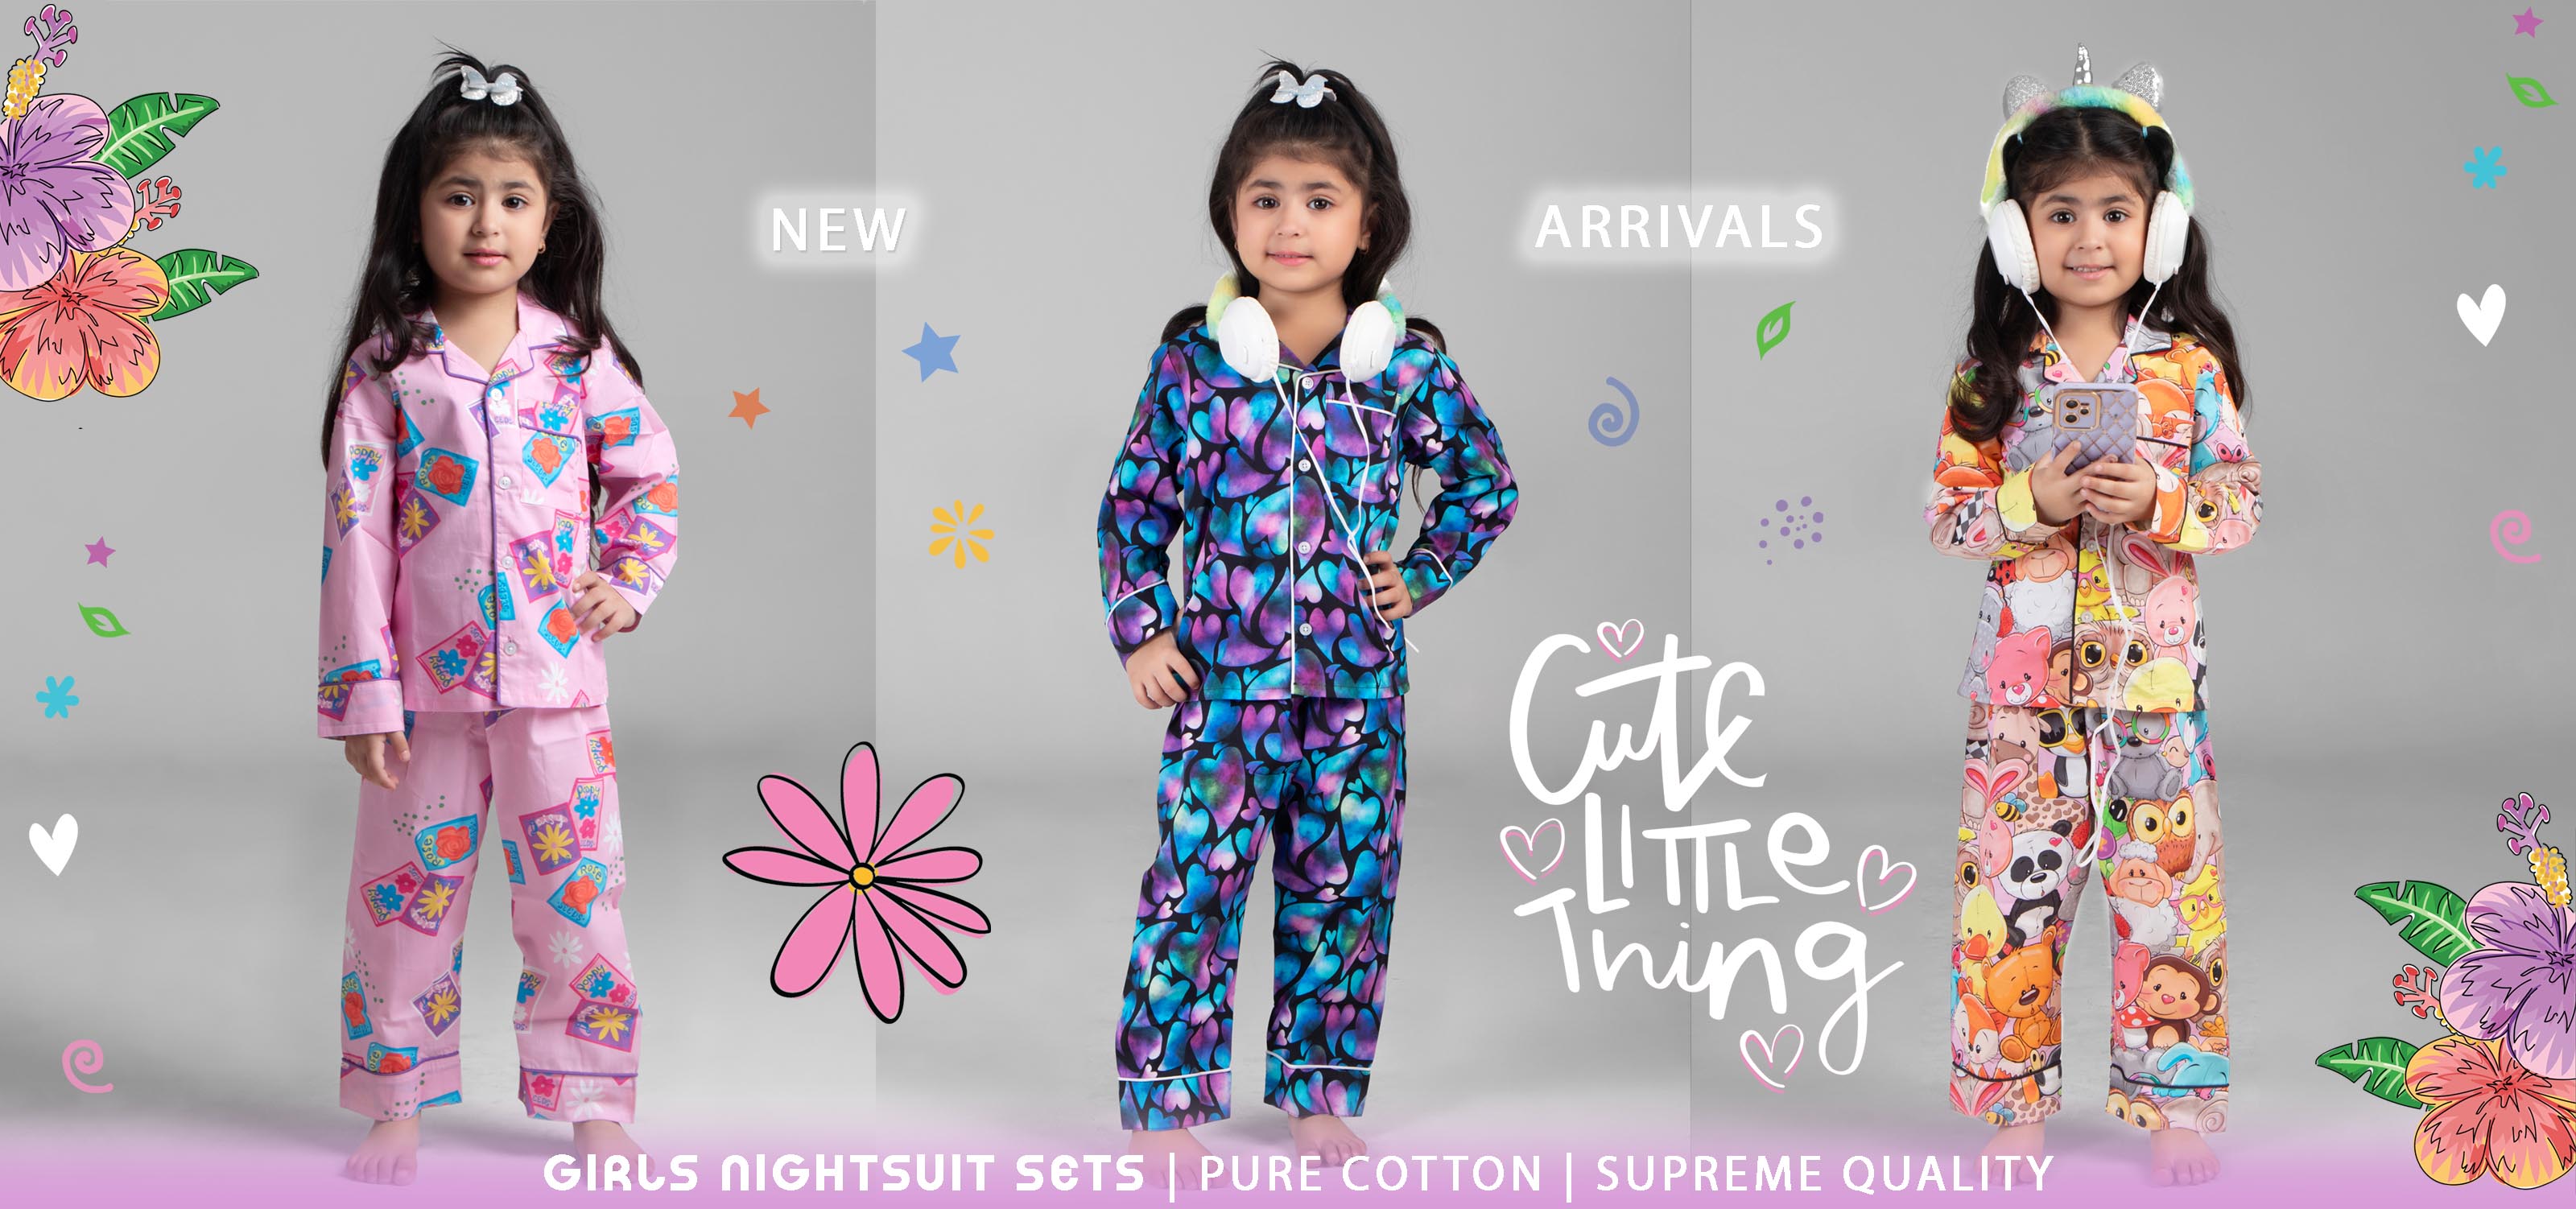 Japanese Kawail Bow Cotton Pajama Set For Women Soft And Cute Lounge  Sleepwear For Girls Long And Casual House Suit 231021 From Huo01, $17.96 |  DHgate.Com